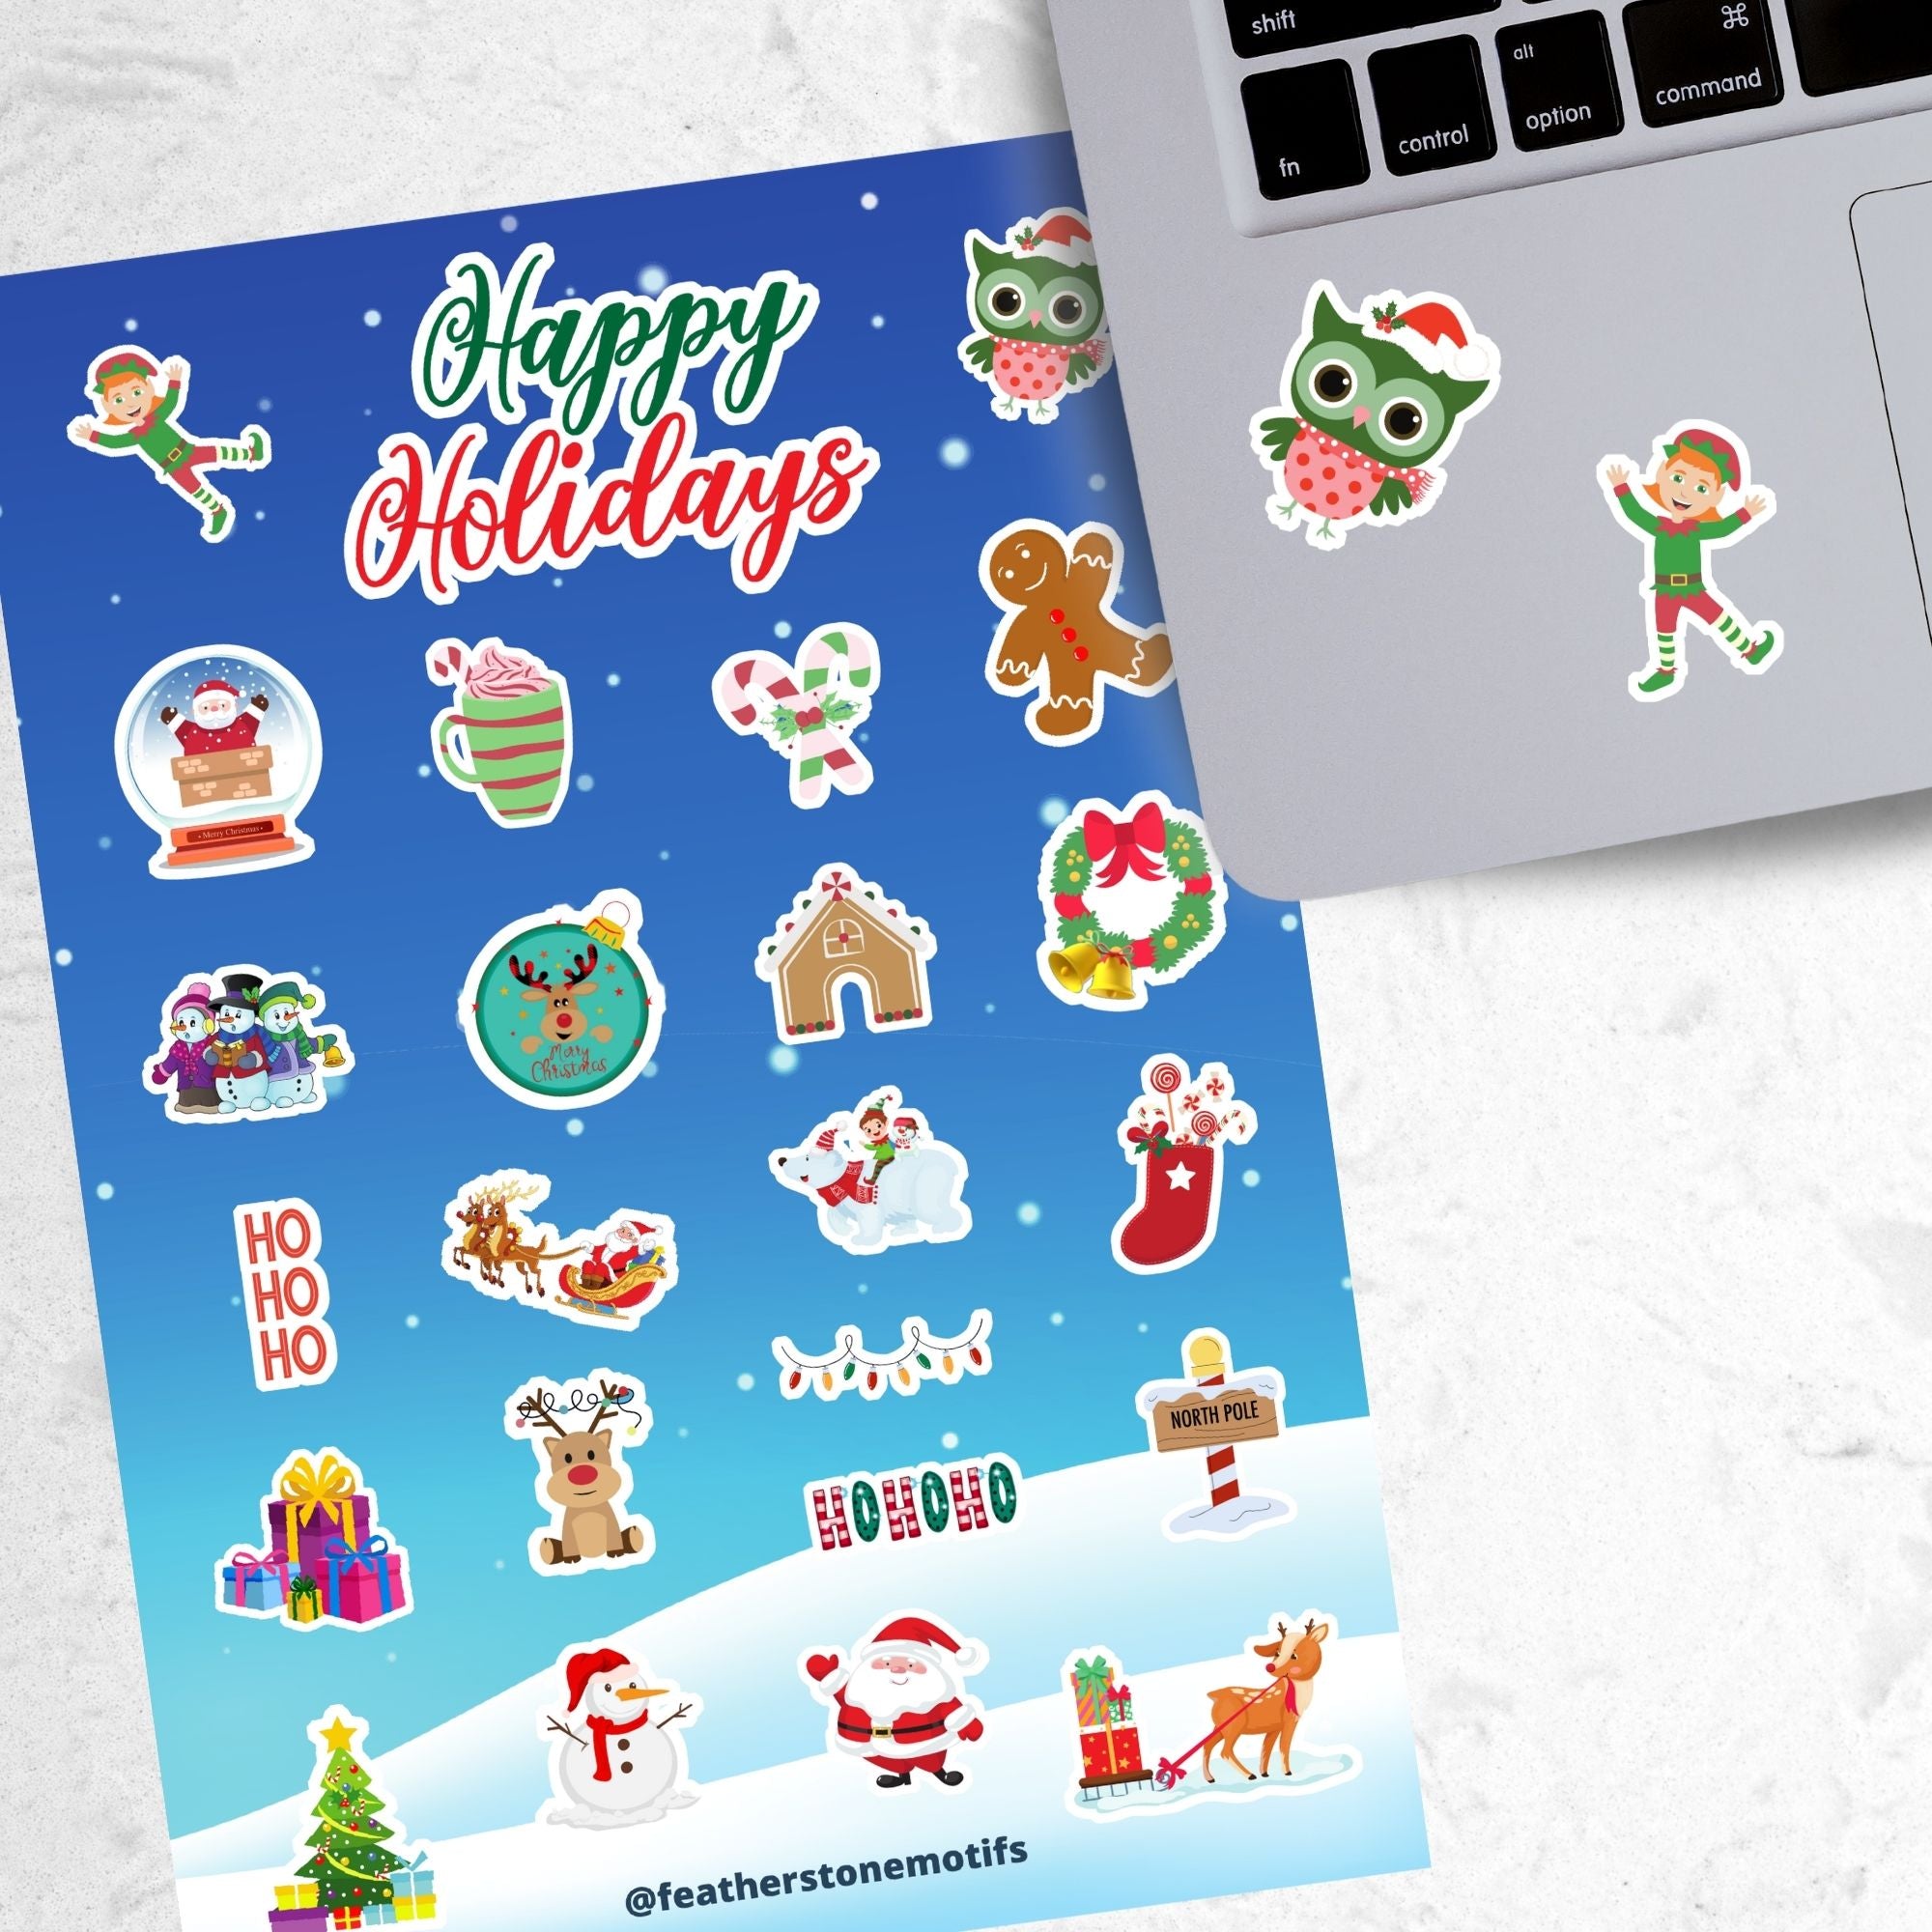 Celebrate the holidays with this winter themed sticker sheet. With sticker images of Santa, elves, snowmen, and your favorite holiday treats, this sticker sheet will bring holiday cheer to every household! It also features a holo star overlay for that extra sparkle! This image shows the sticker sheet next to an open laptop with stickers of a holiday owl and an elf applied below the keyboard.